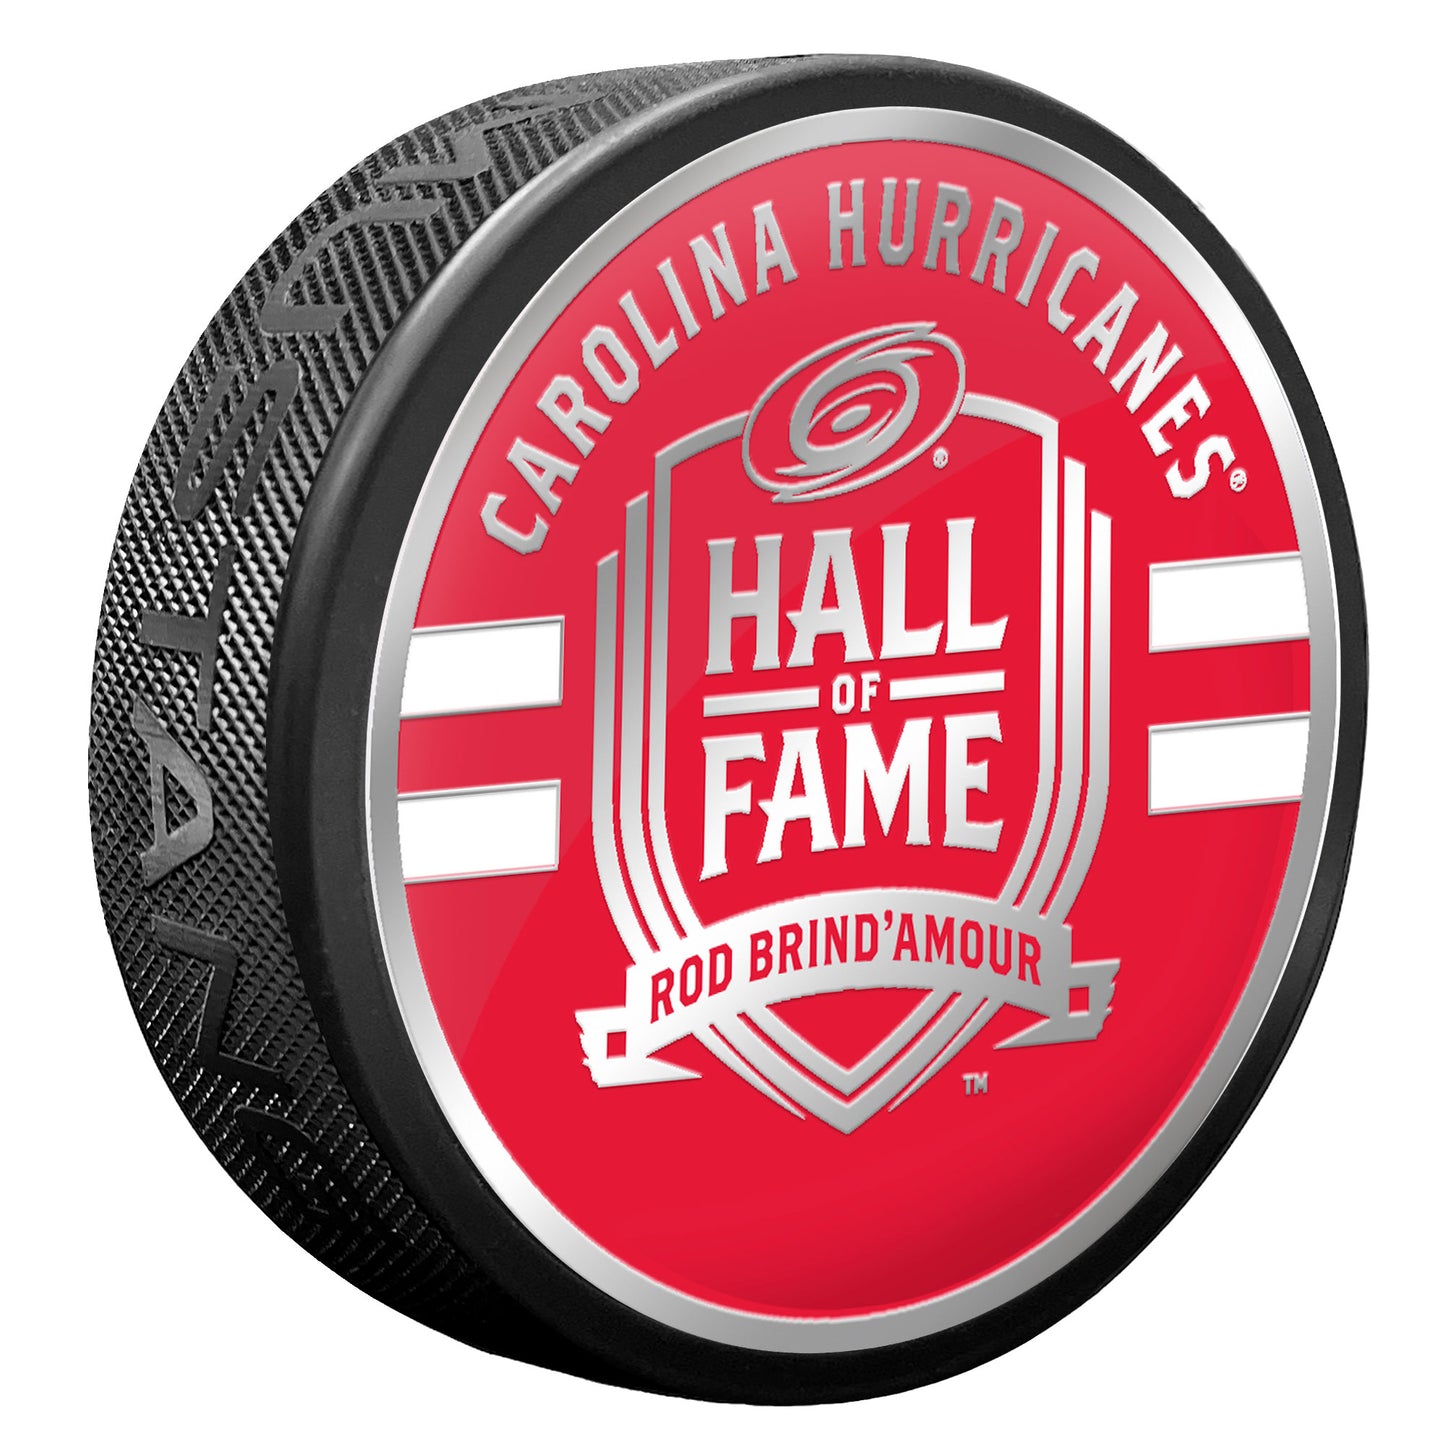 Mustang Products HOF Brind'Amour Medallion Puck